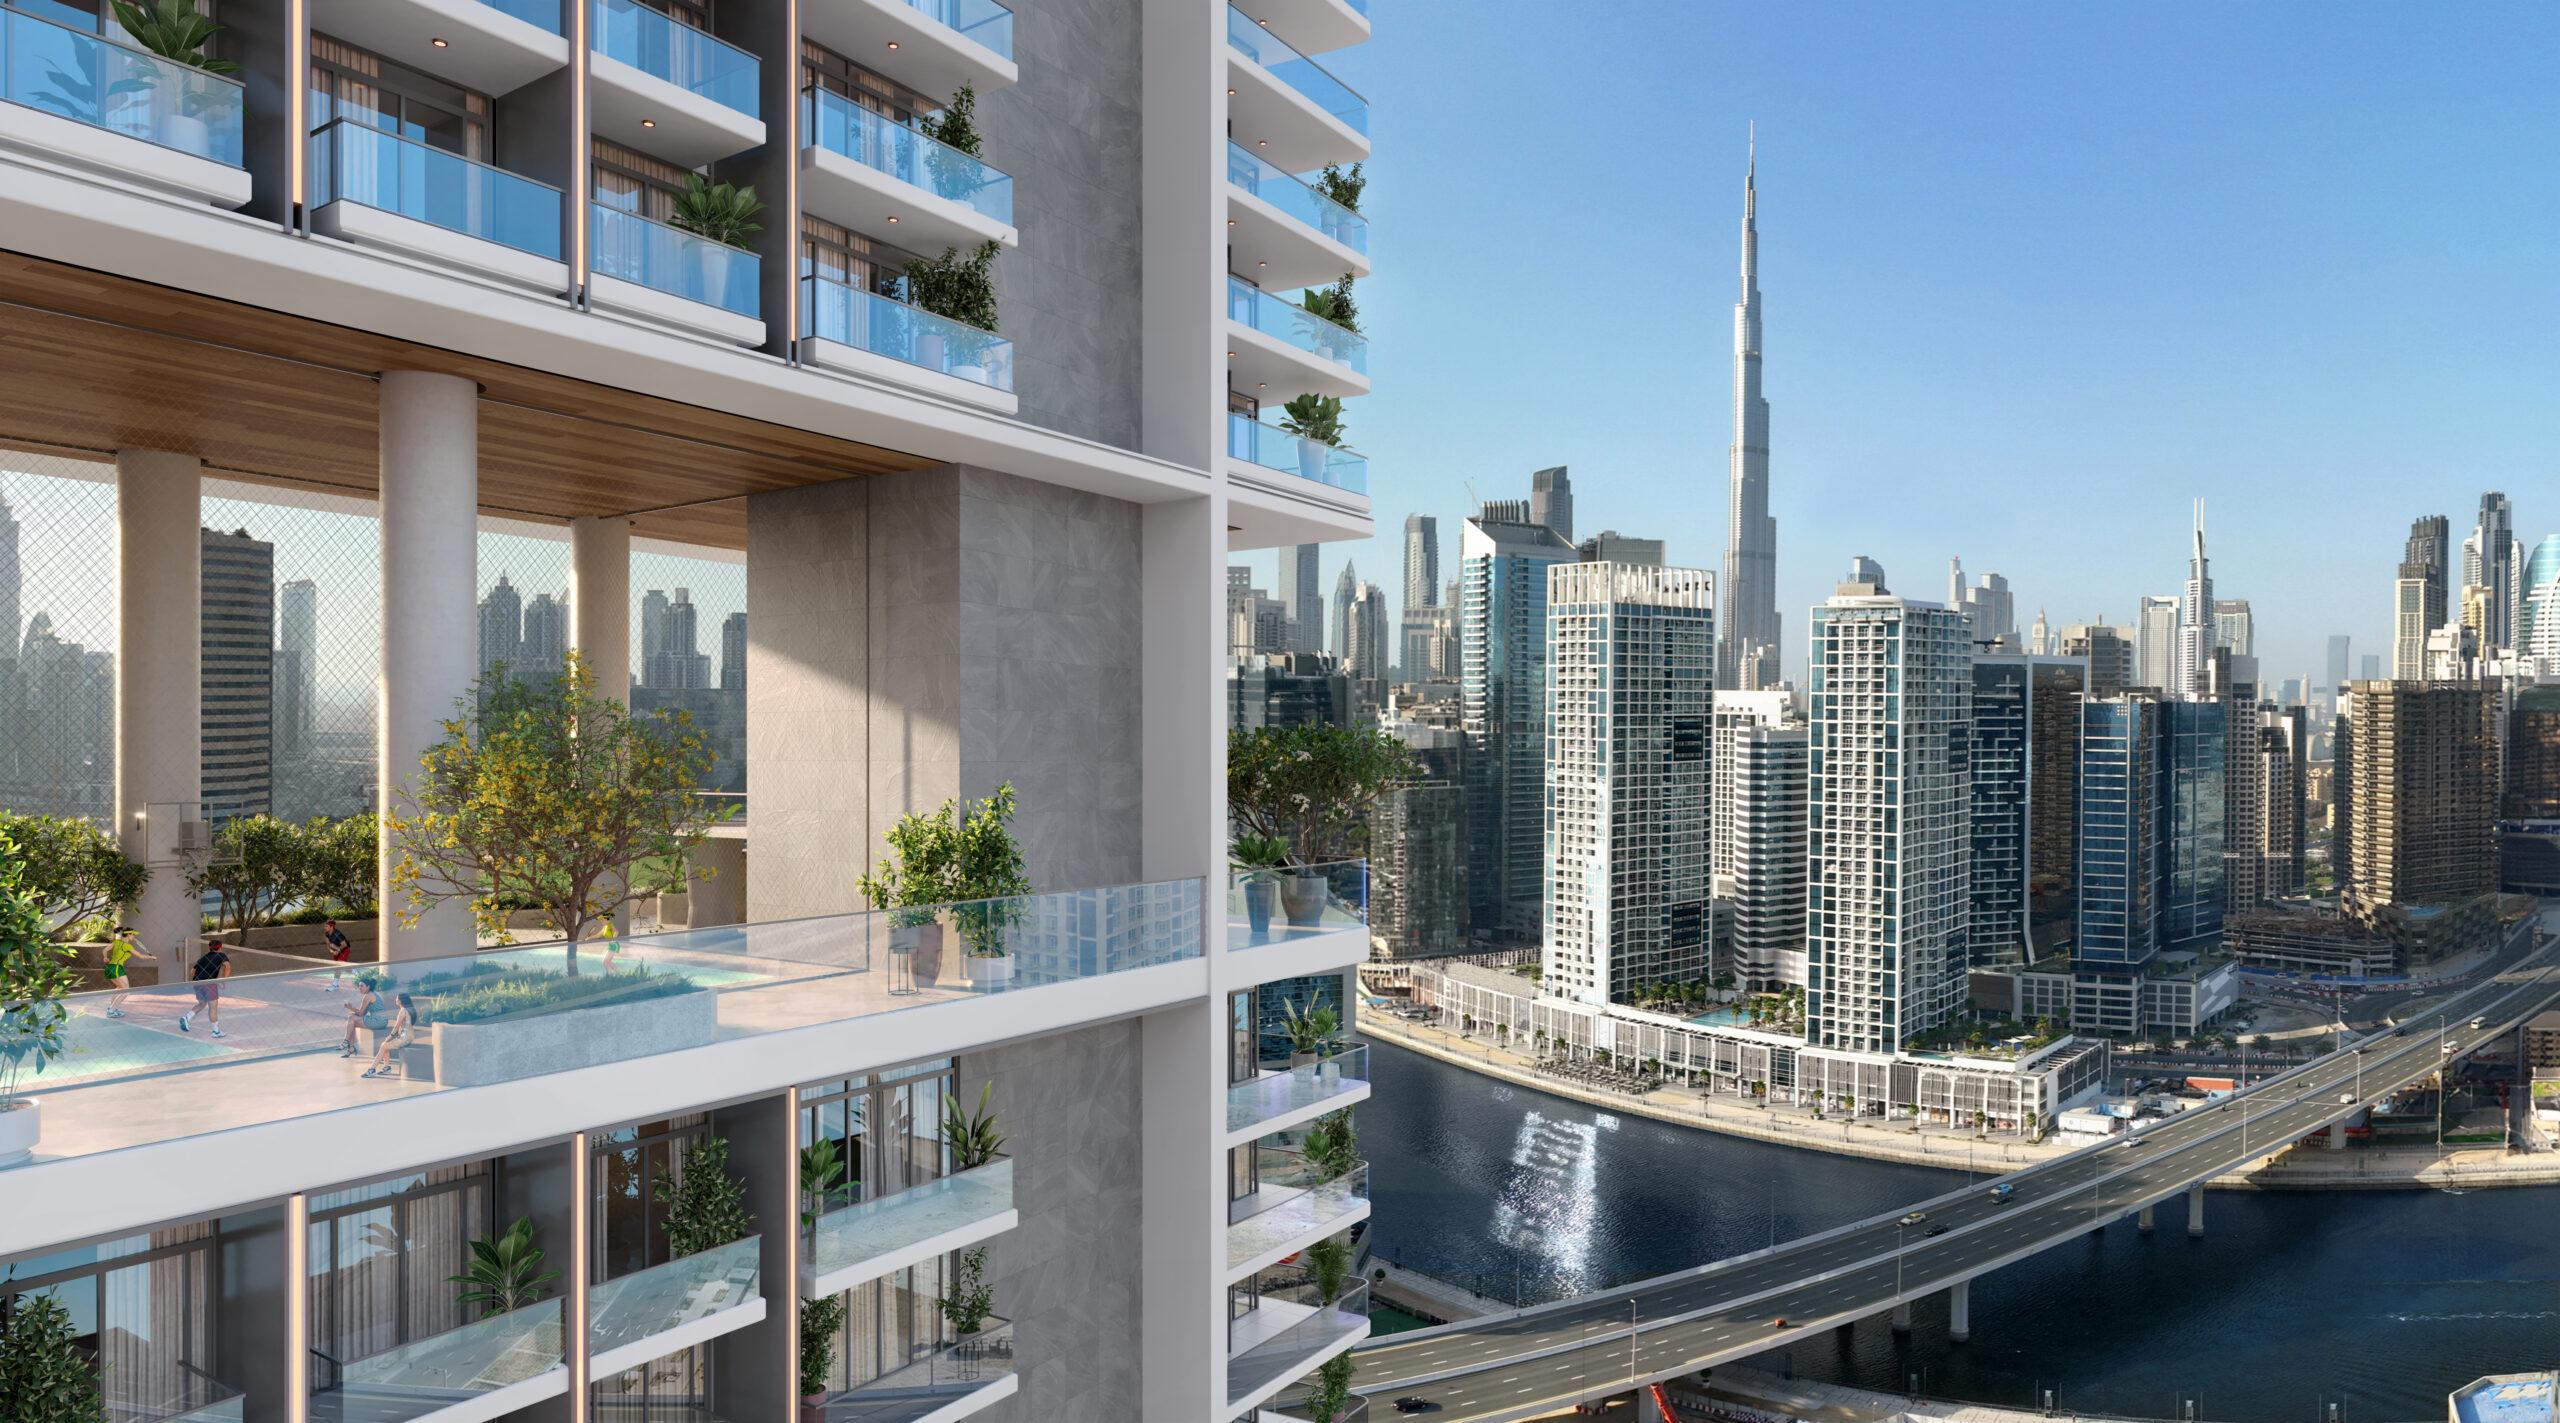 Dubai real estate: Rove, IRTH launch new residential project in Business Bay